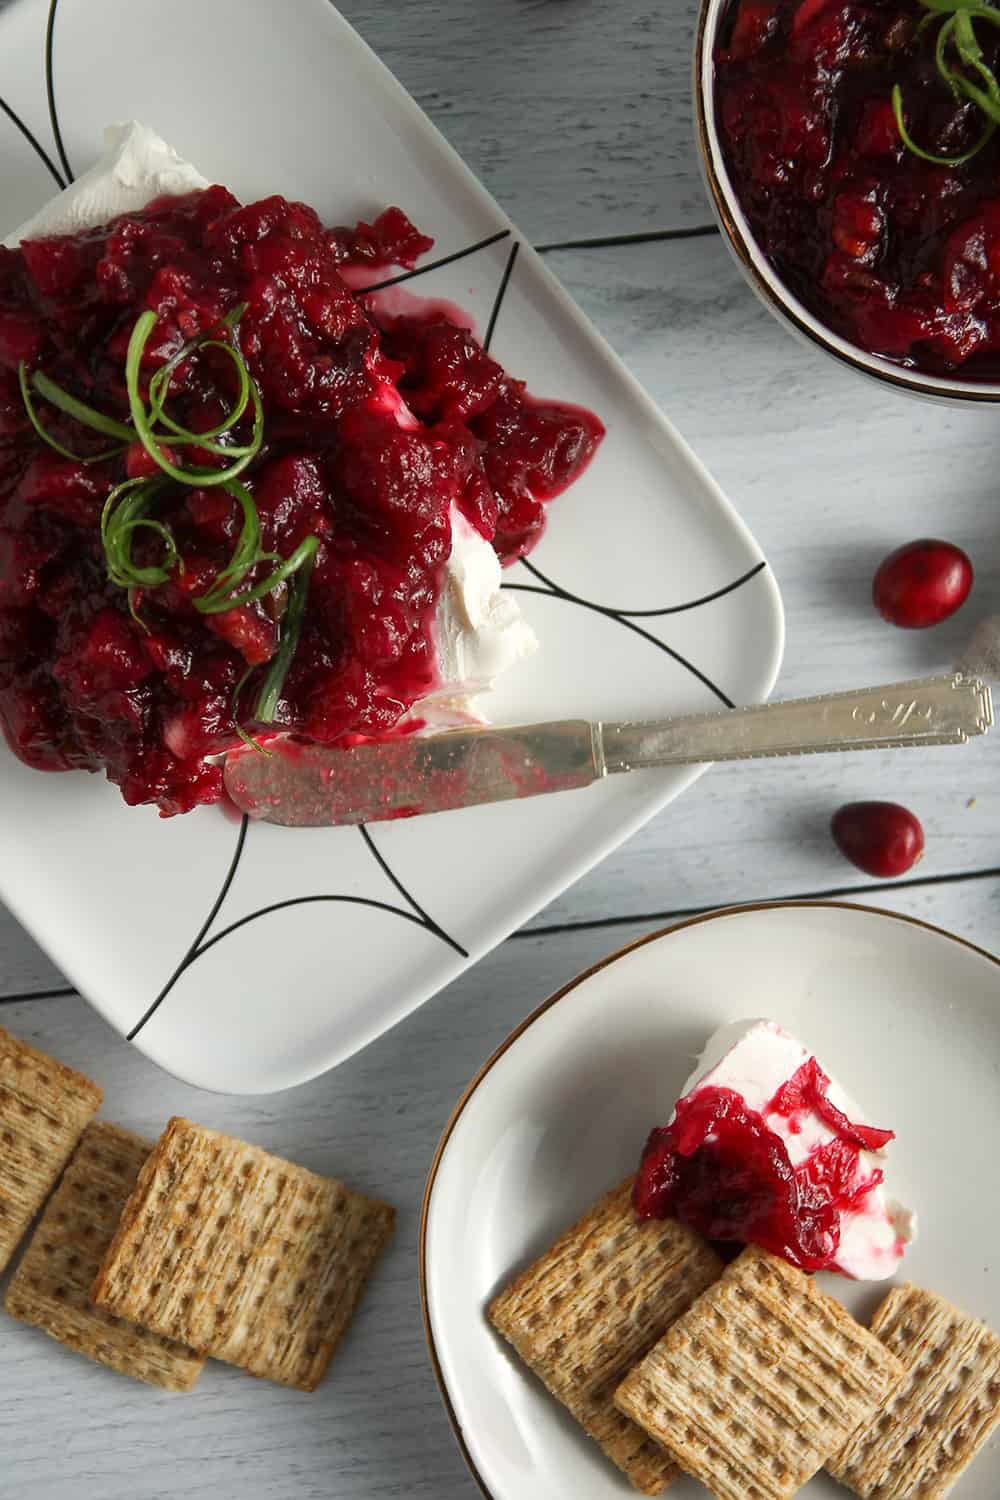 Use your favorite Texas Cranberry Chutney to make an easy Cranberry Cream Cheese Dip for holiday parties